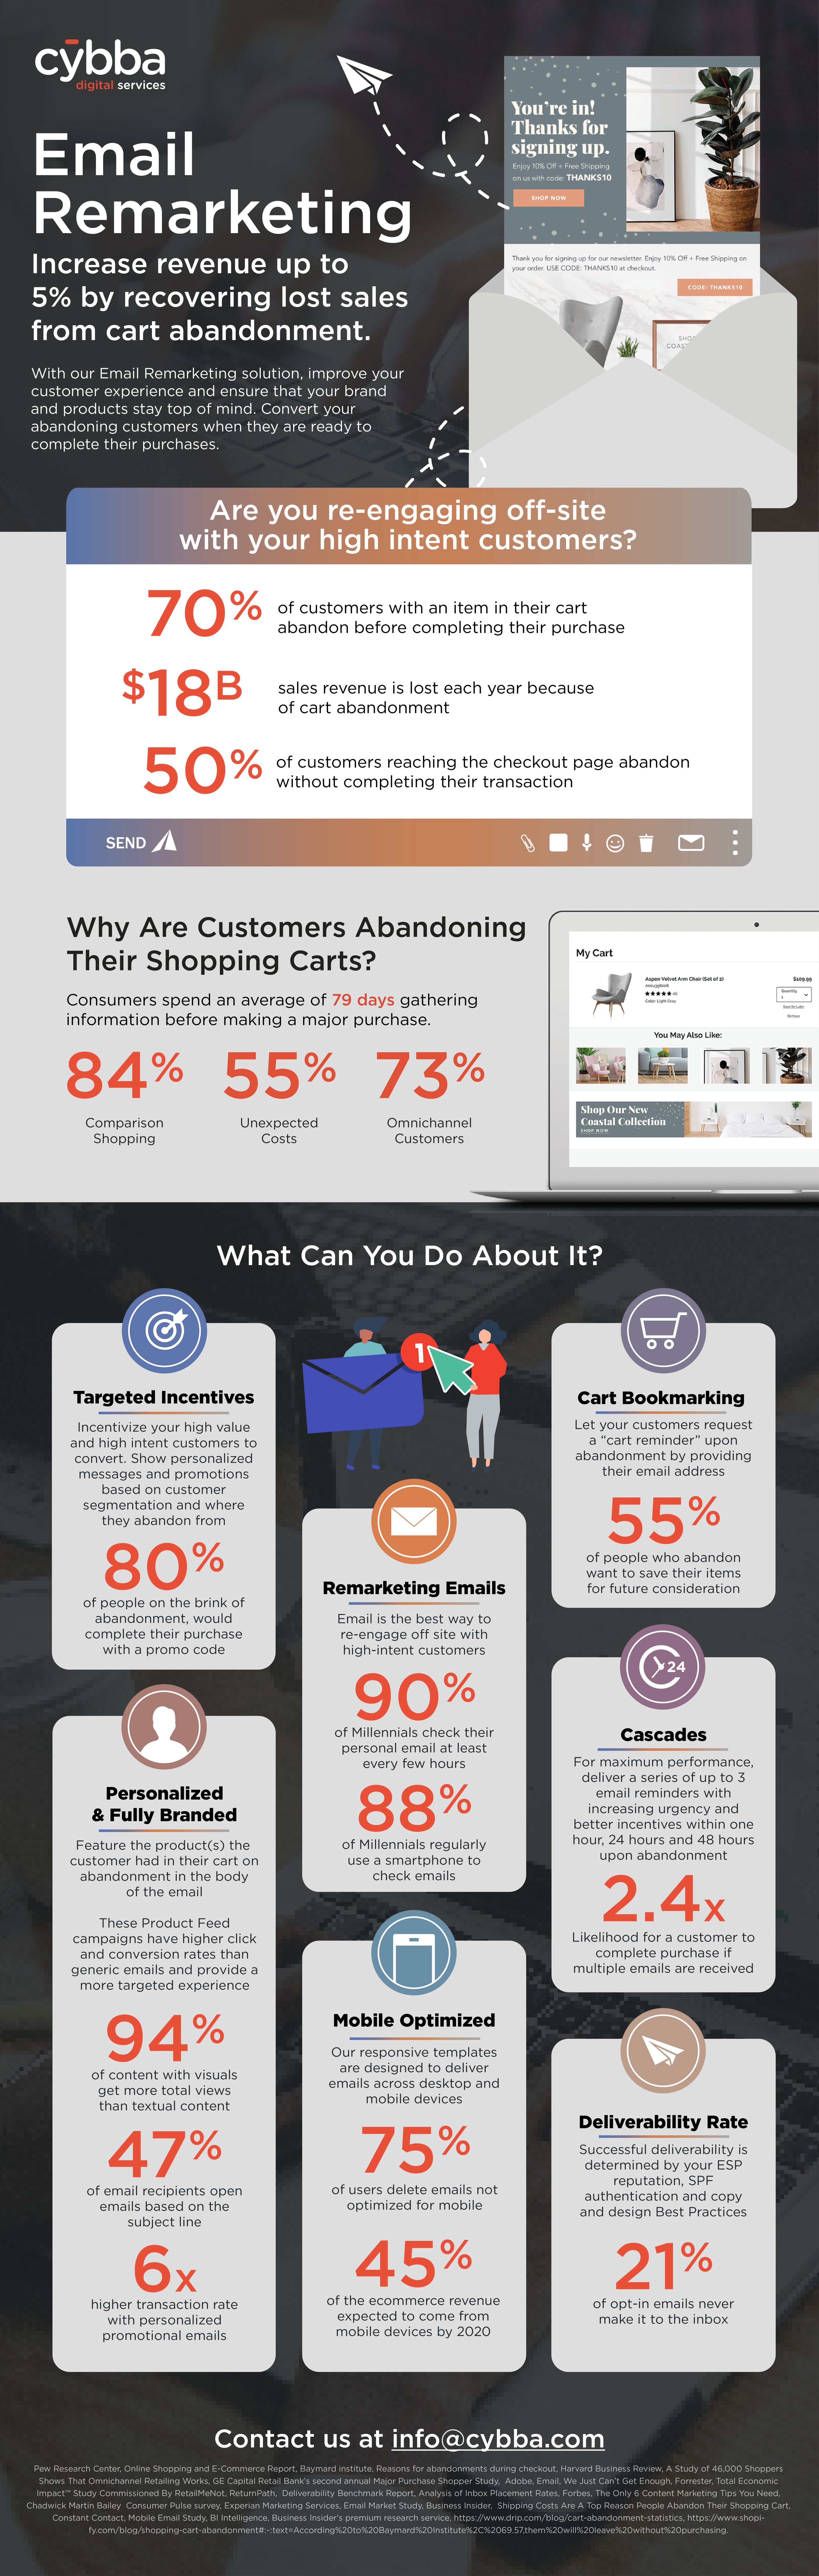 EmailRemarketing_Infographic_R4-01